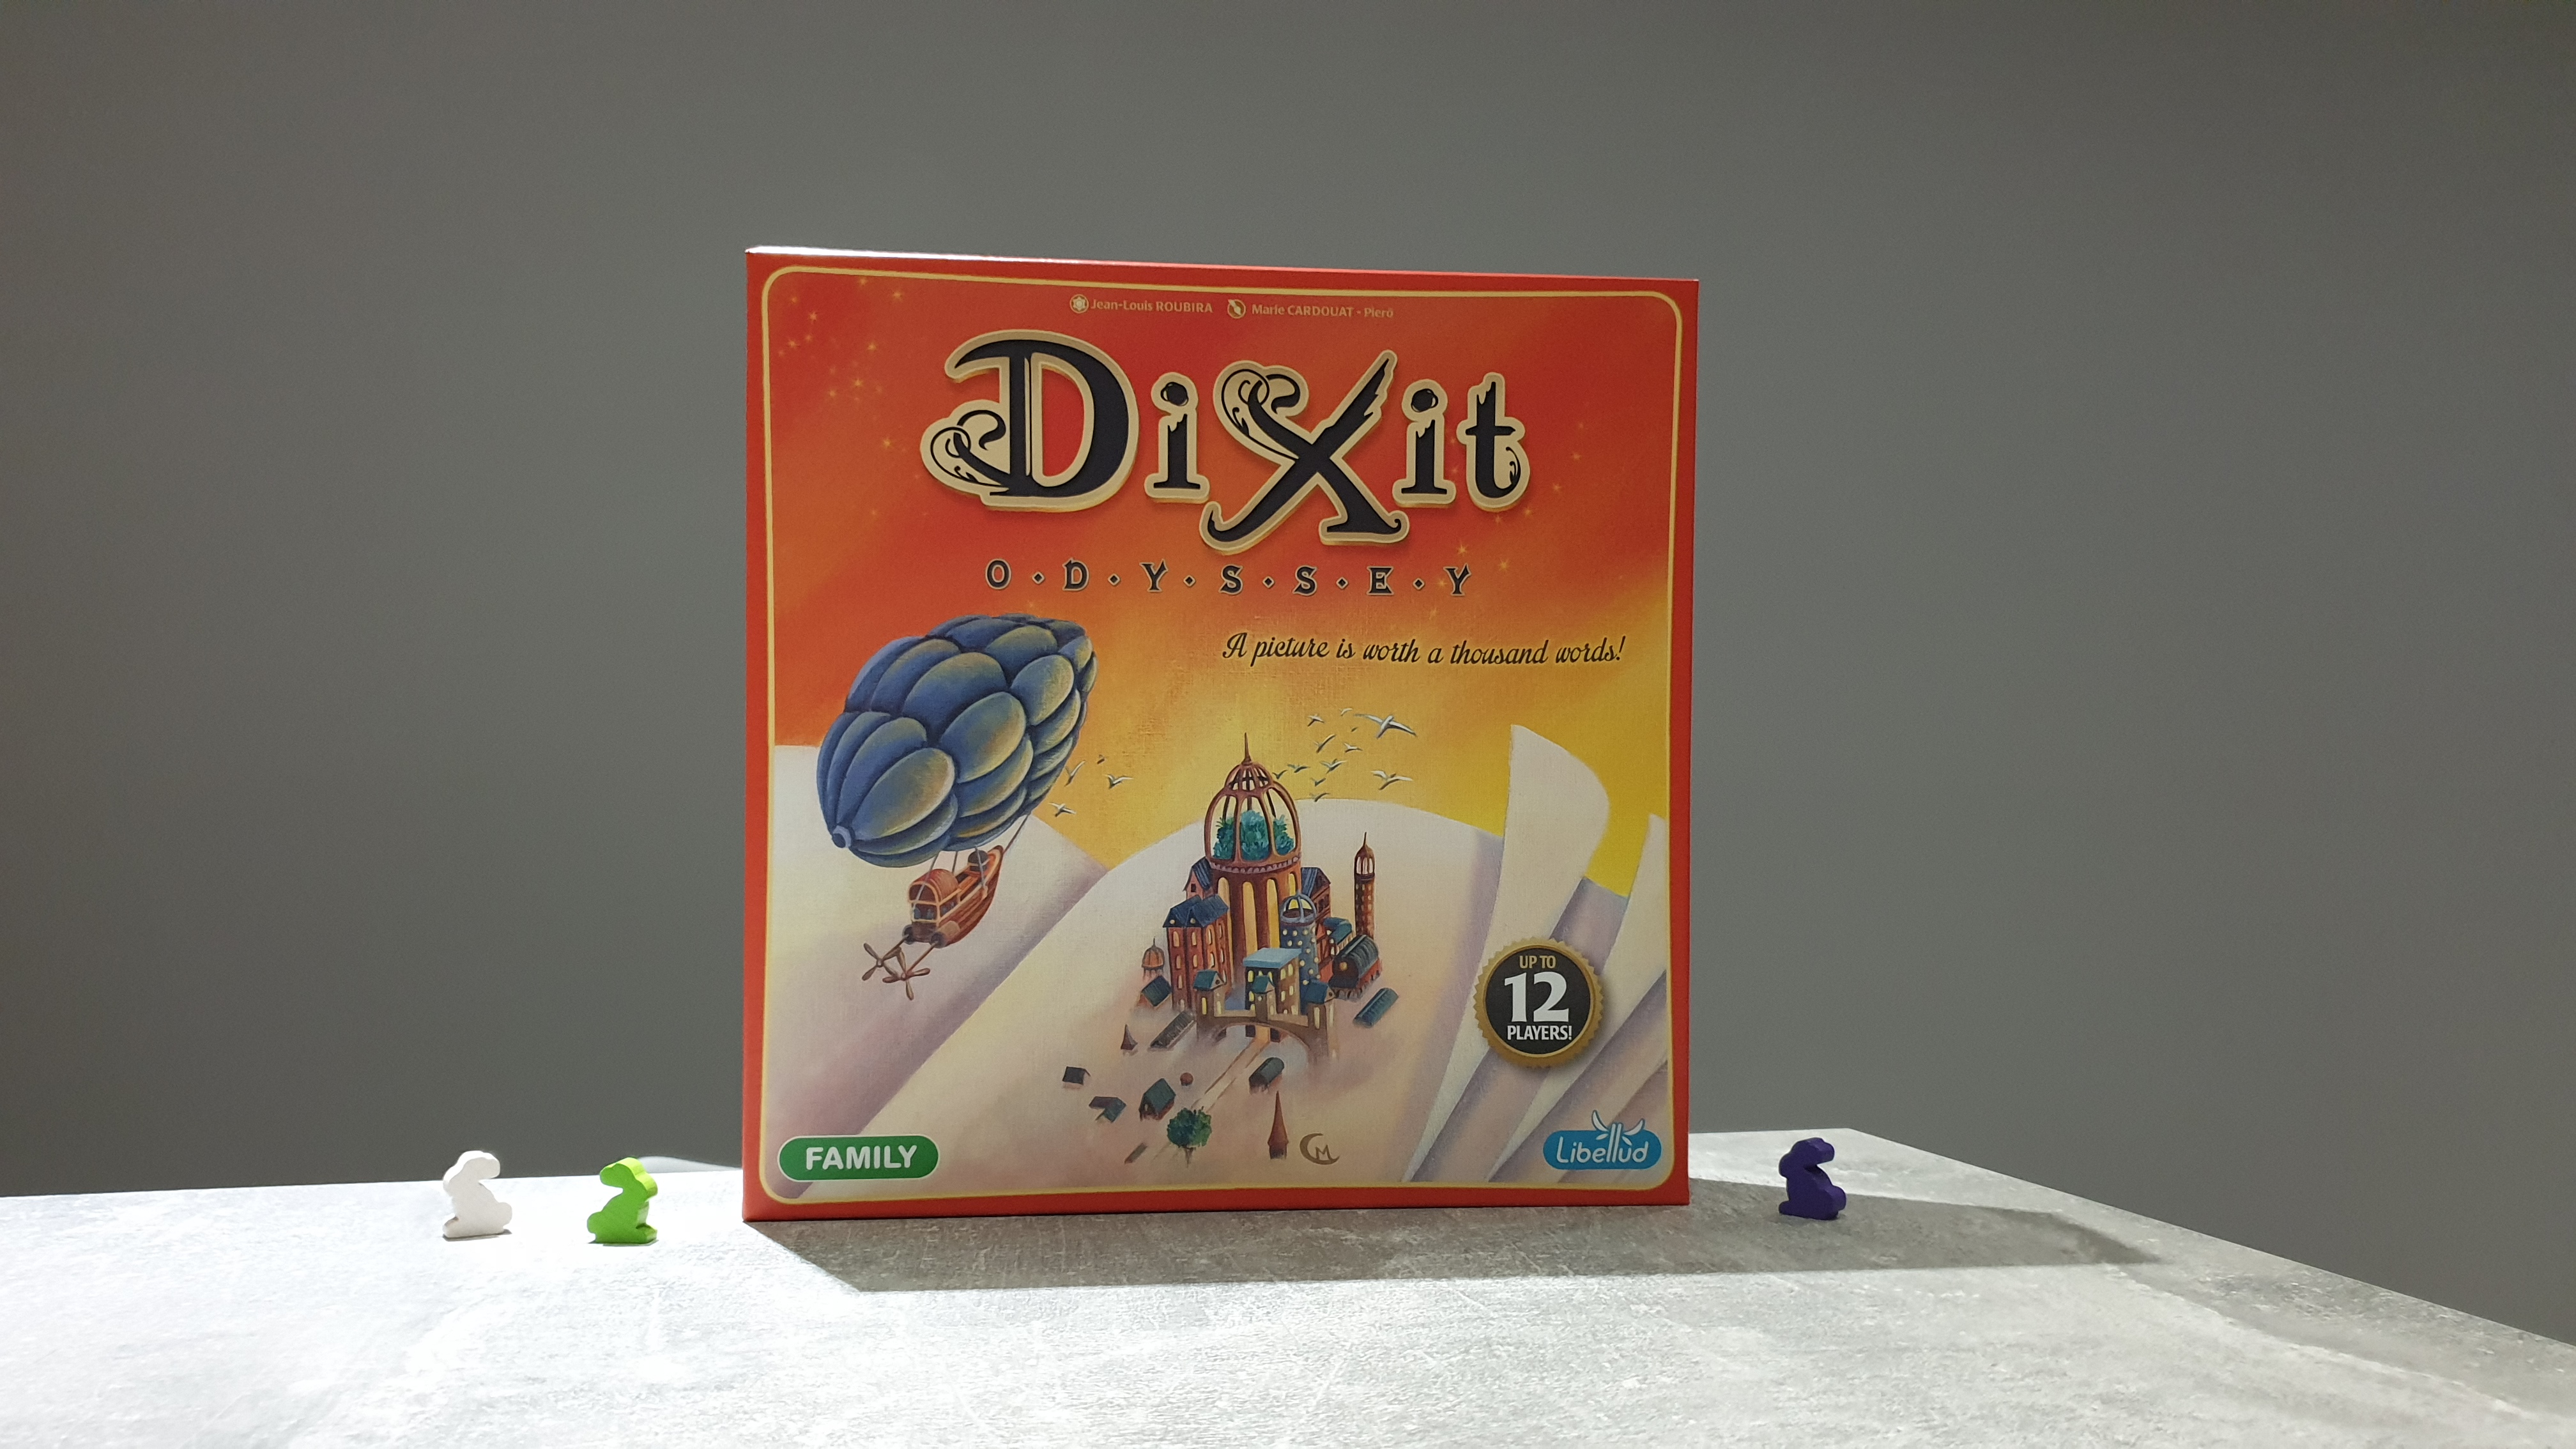 Dixit Odyssey Review – More Art, More Bunnies